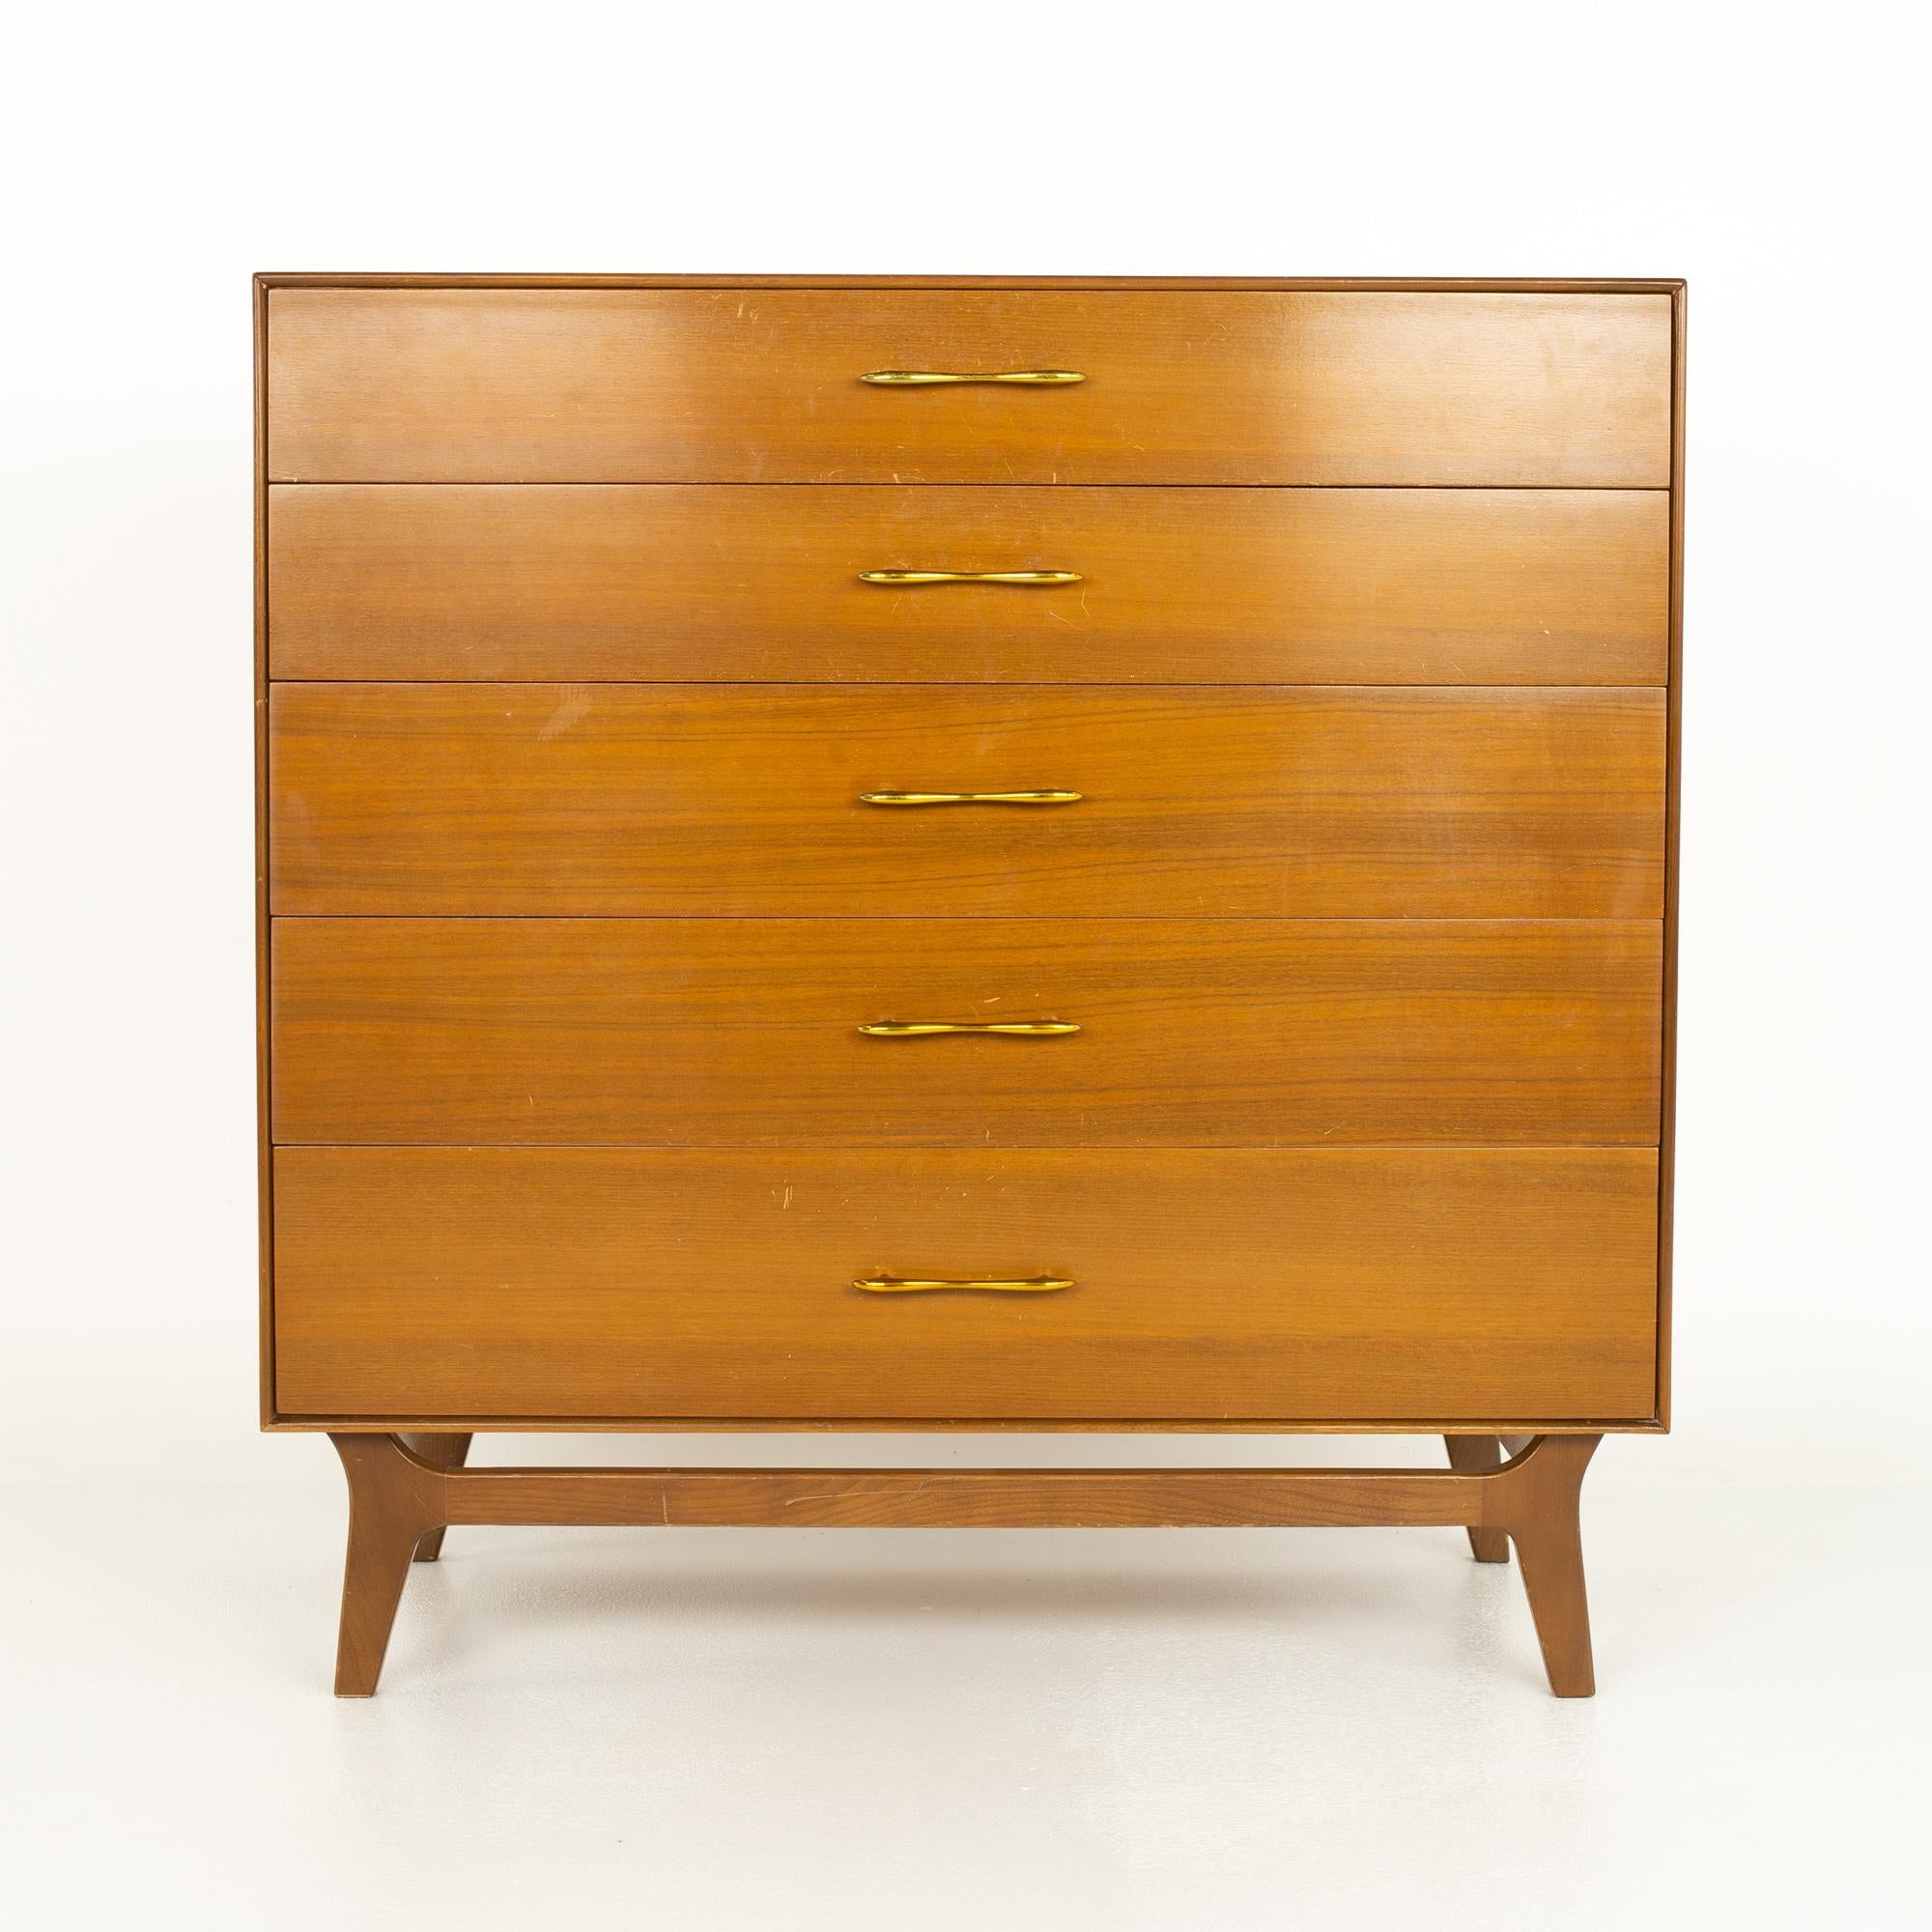 Rway Mid Century 5 Drawer Walnut and Brass Highboy Dresser

This dresser measures: 40 wide x 19.25 deep x 40.5 inches high

?All pieces of furniture can be had in what we call restored vintage condition. That means the piece is restored upon